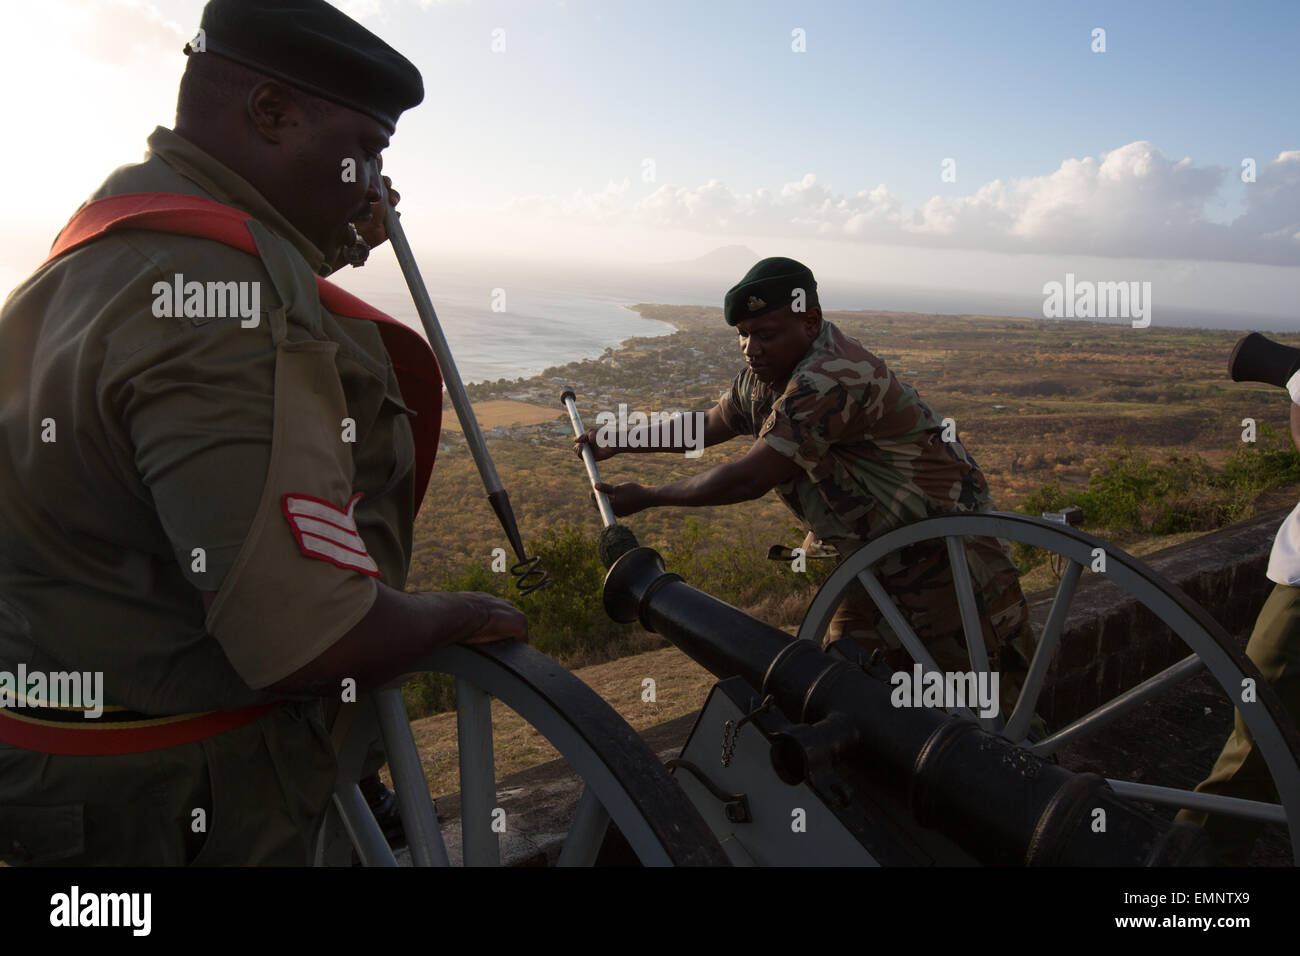 Brimstone Hill Fortress National Park, with soldiers, in St. Kitts, Caribbean. Stock Photo